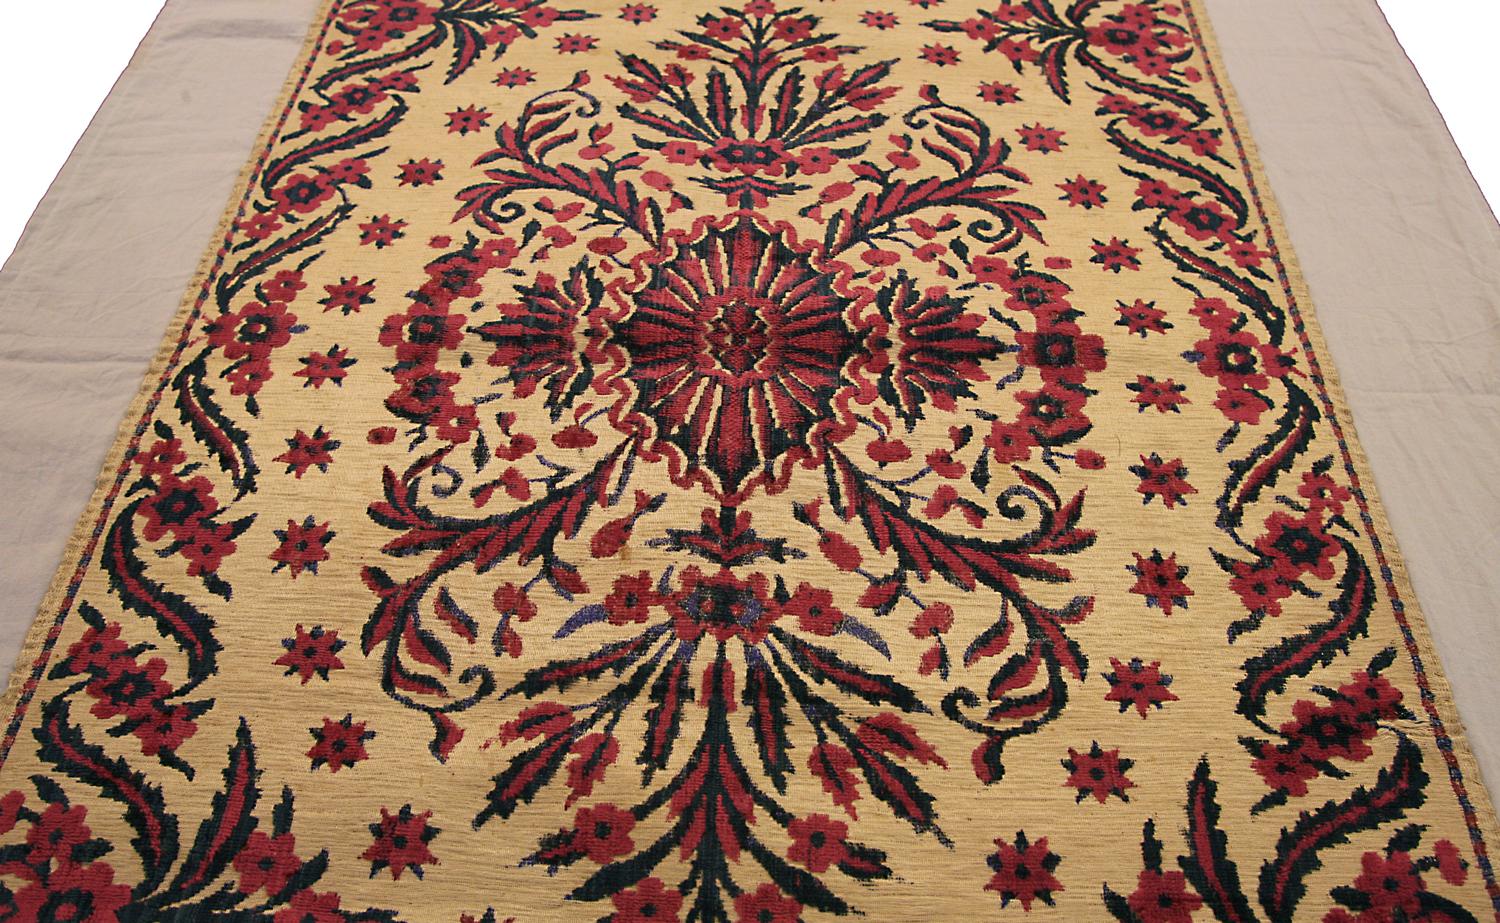 This is a rare antique ottoman textile woven in Turkey during the 19th century that measures 118 x 55CM in size. Its design revolves around its floral center medallion set on a beige background color and surrounded by star motifs spread throughout